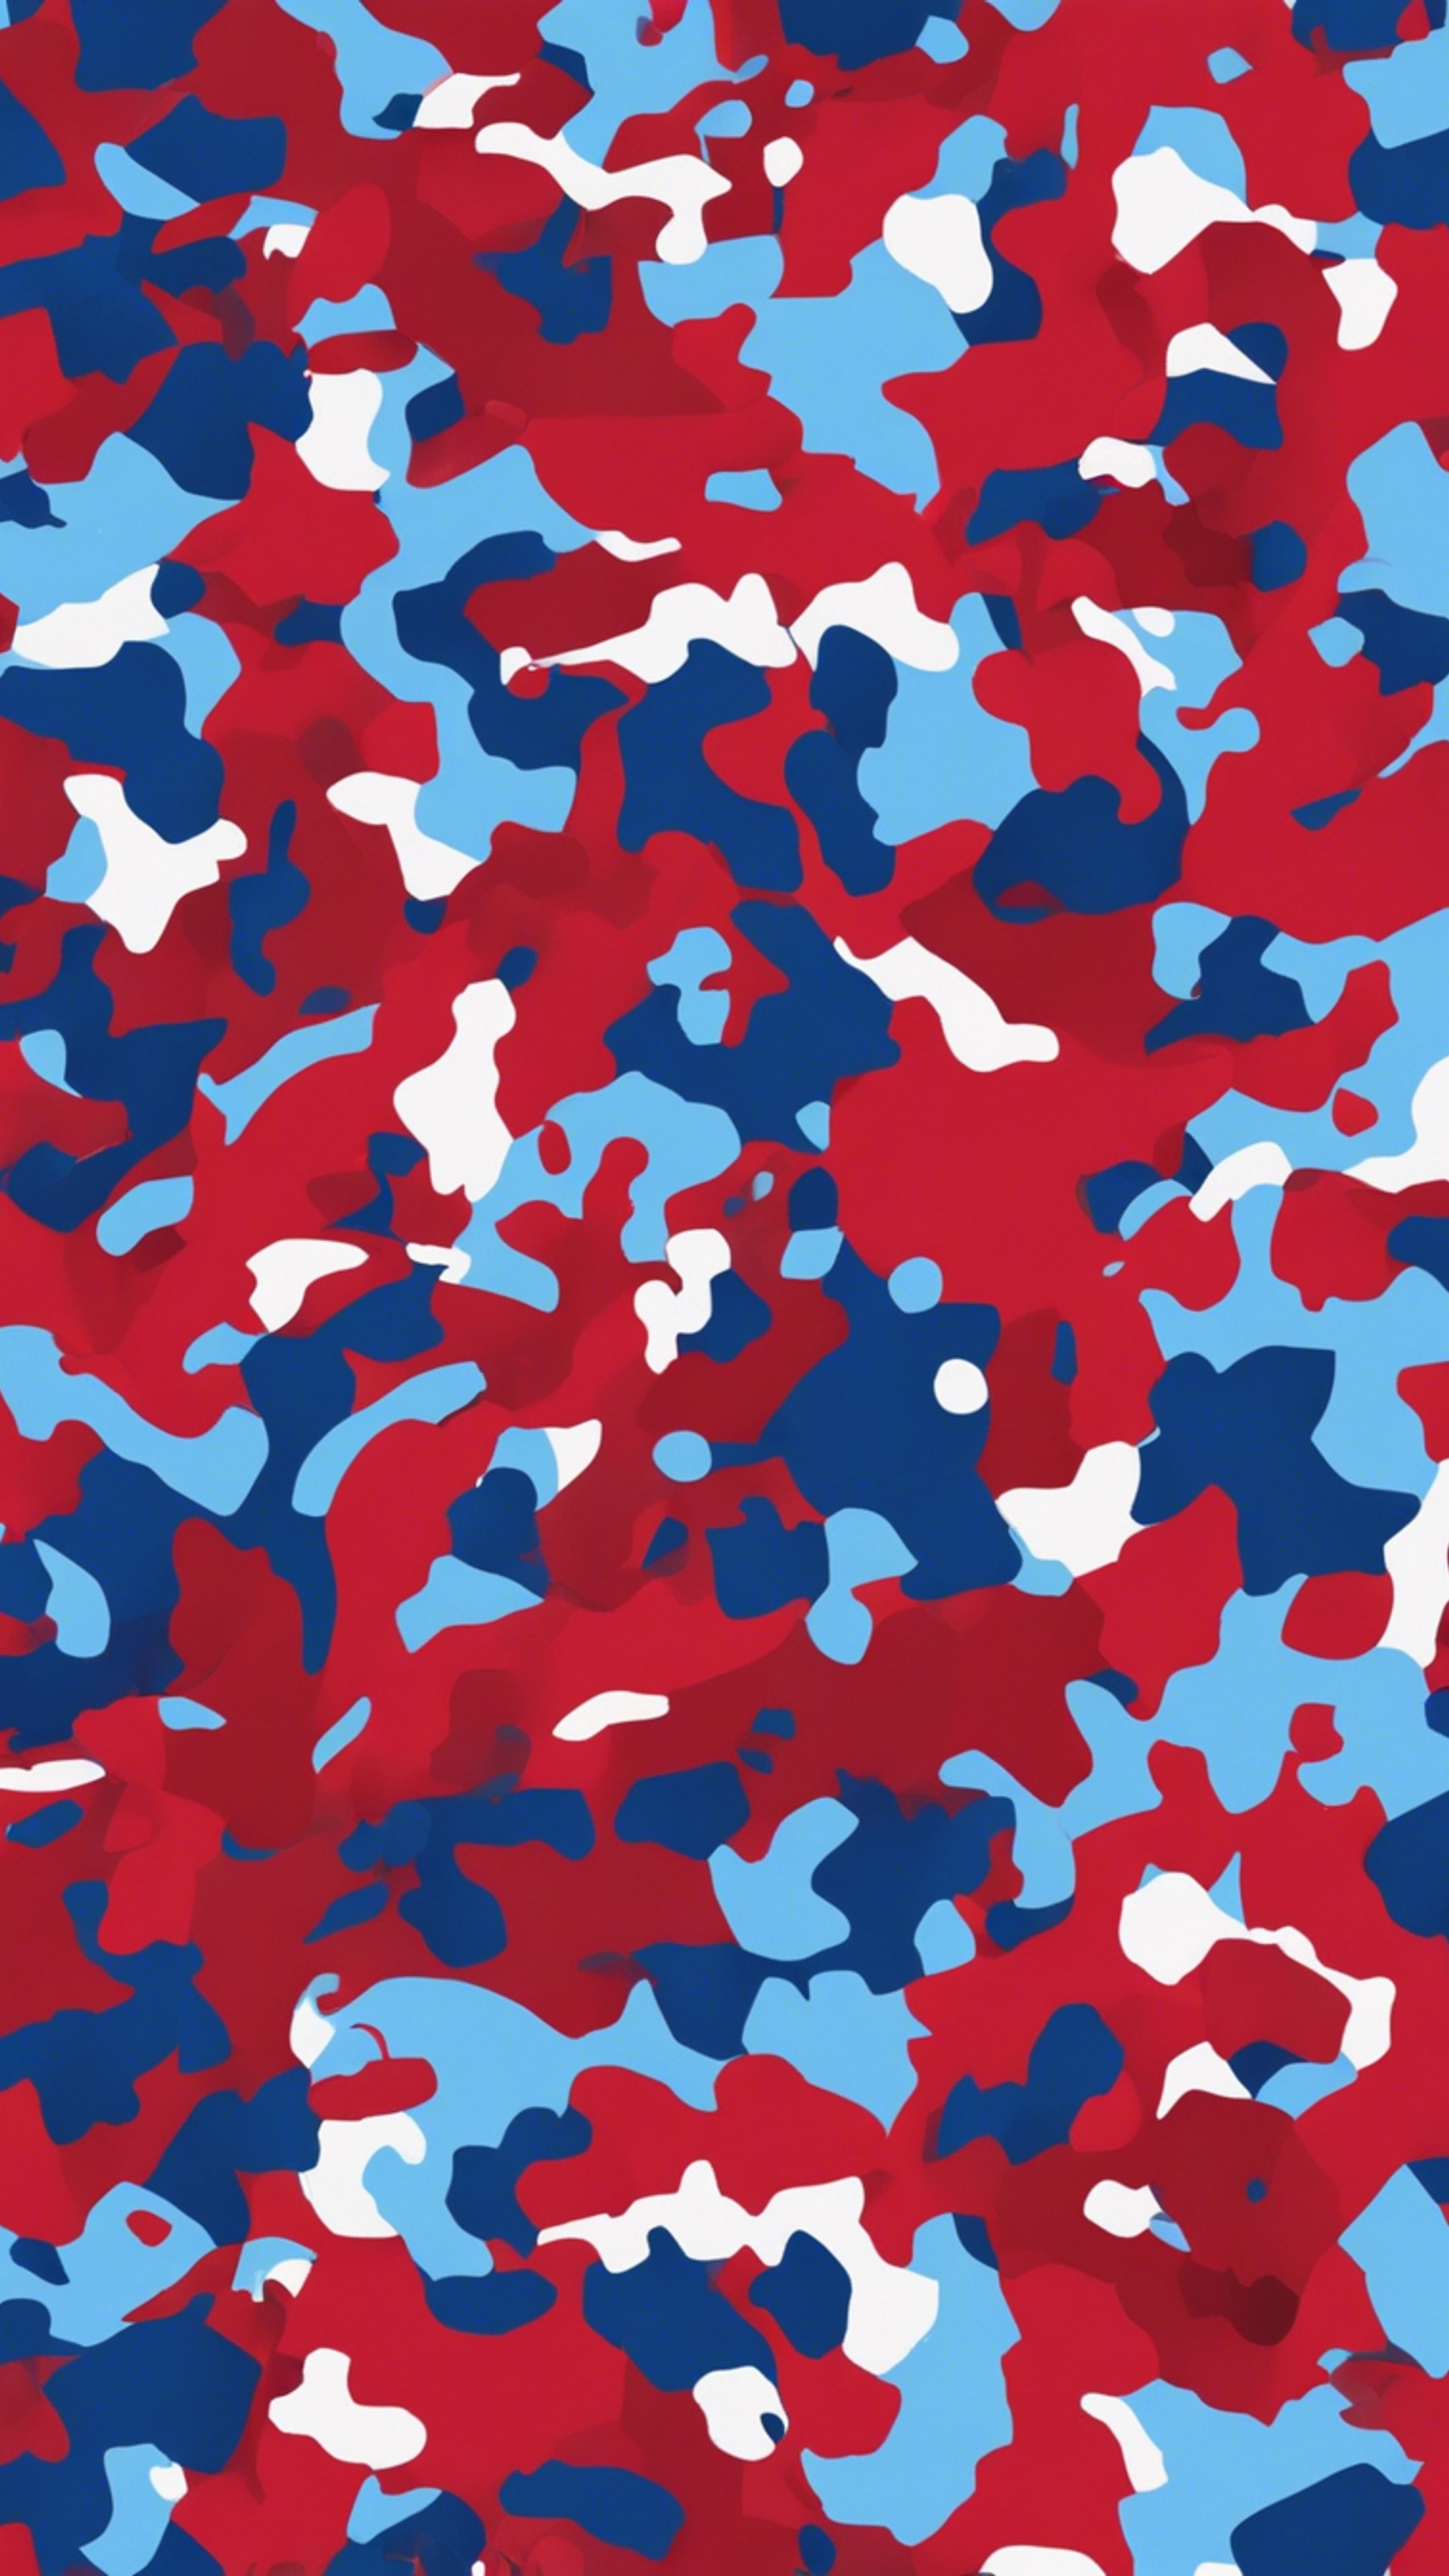 Camouflage pattern in shades of red and blue distributed randomly.壁紙[29e12ceb4fee465f920c]